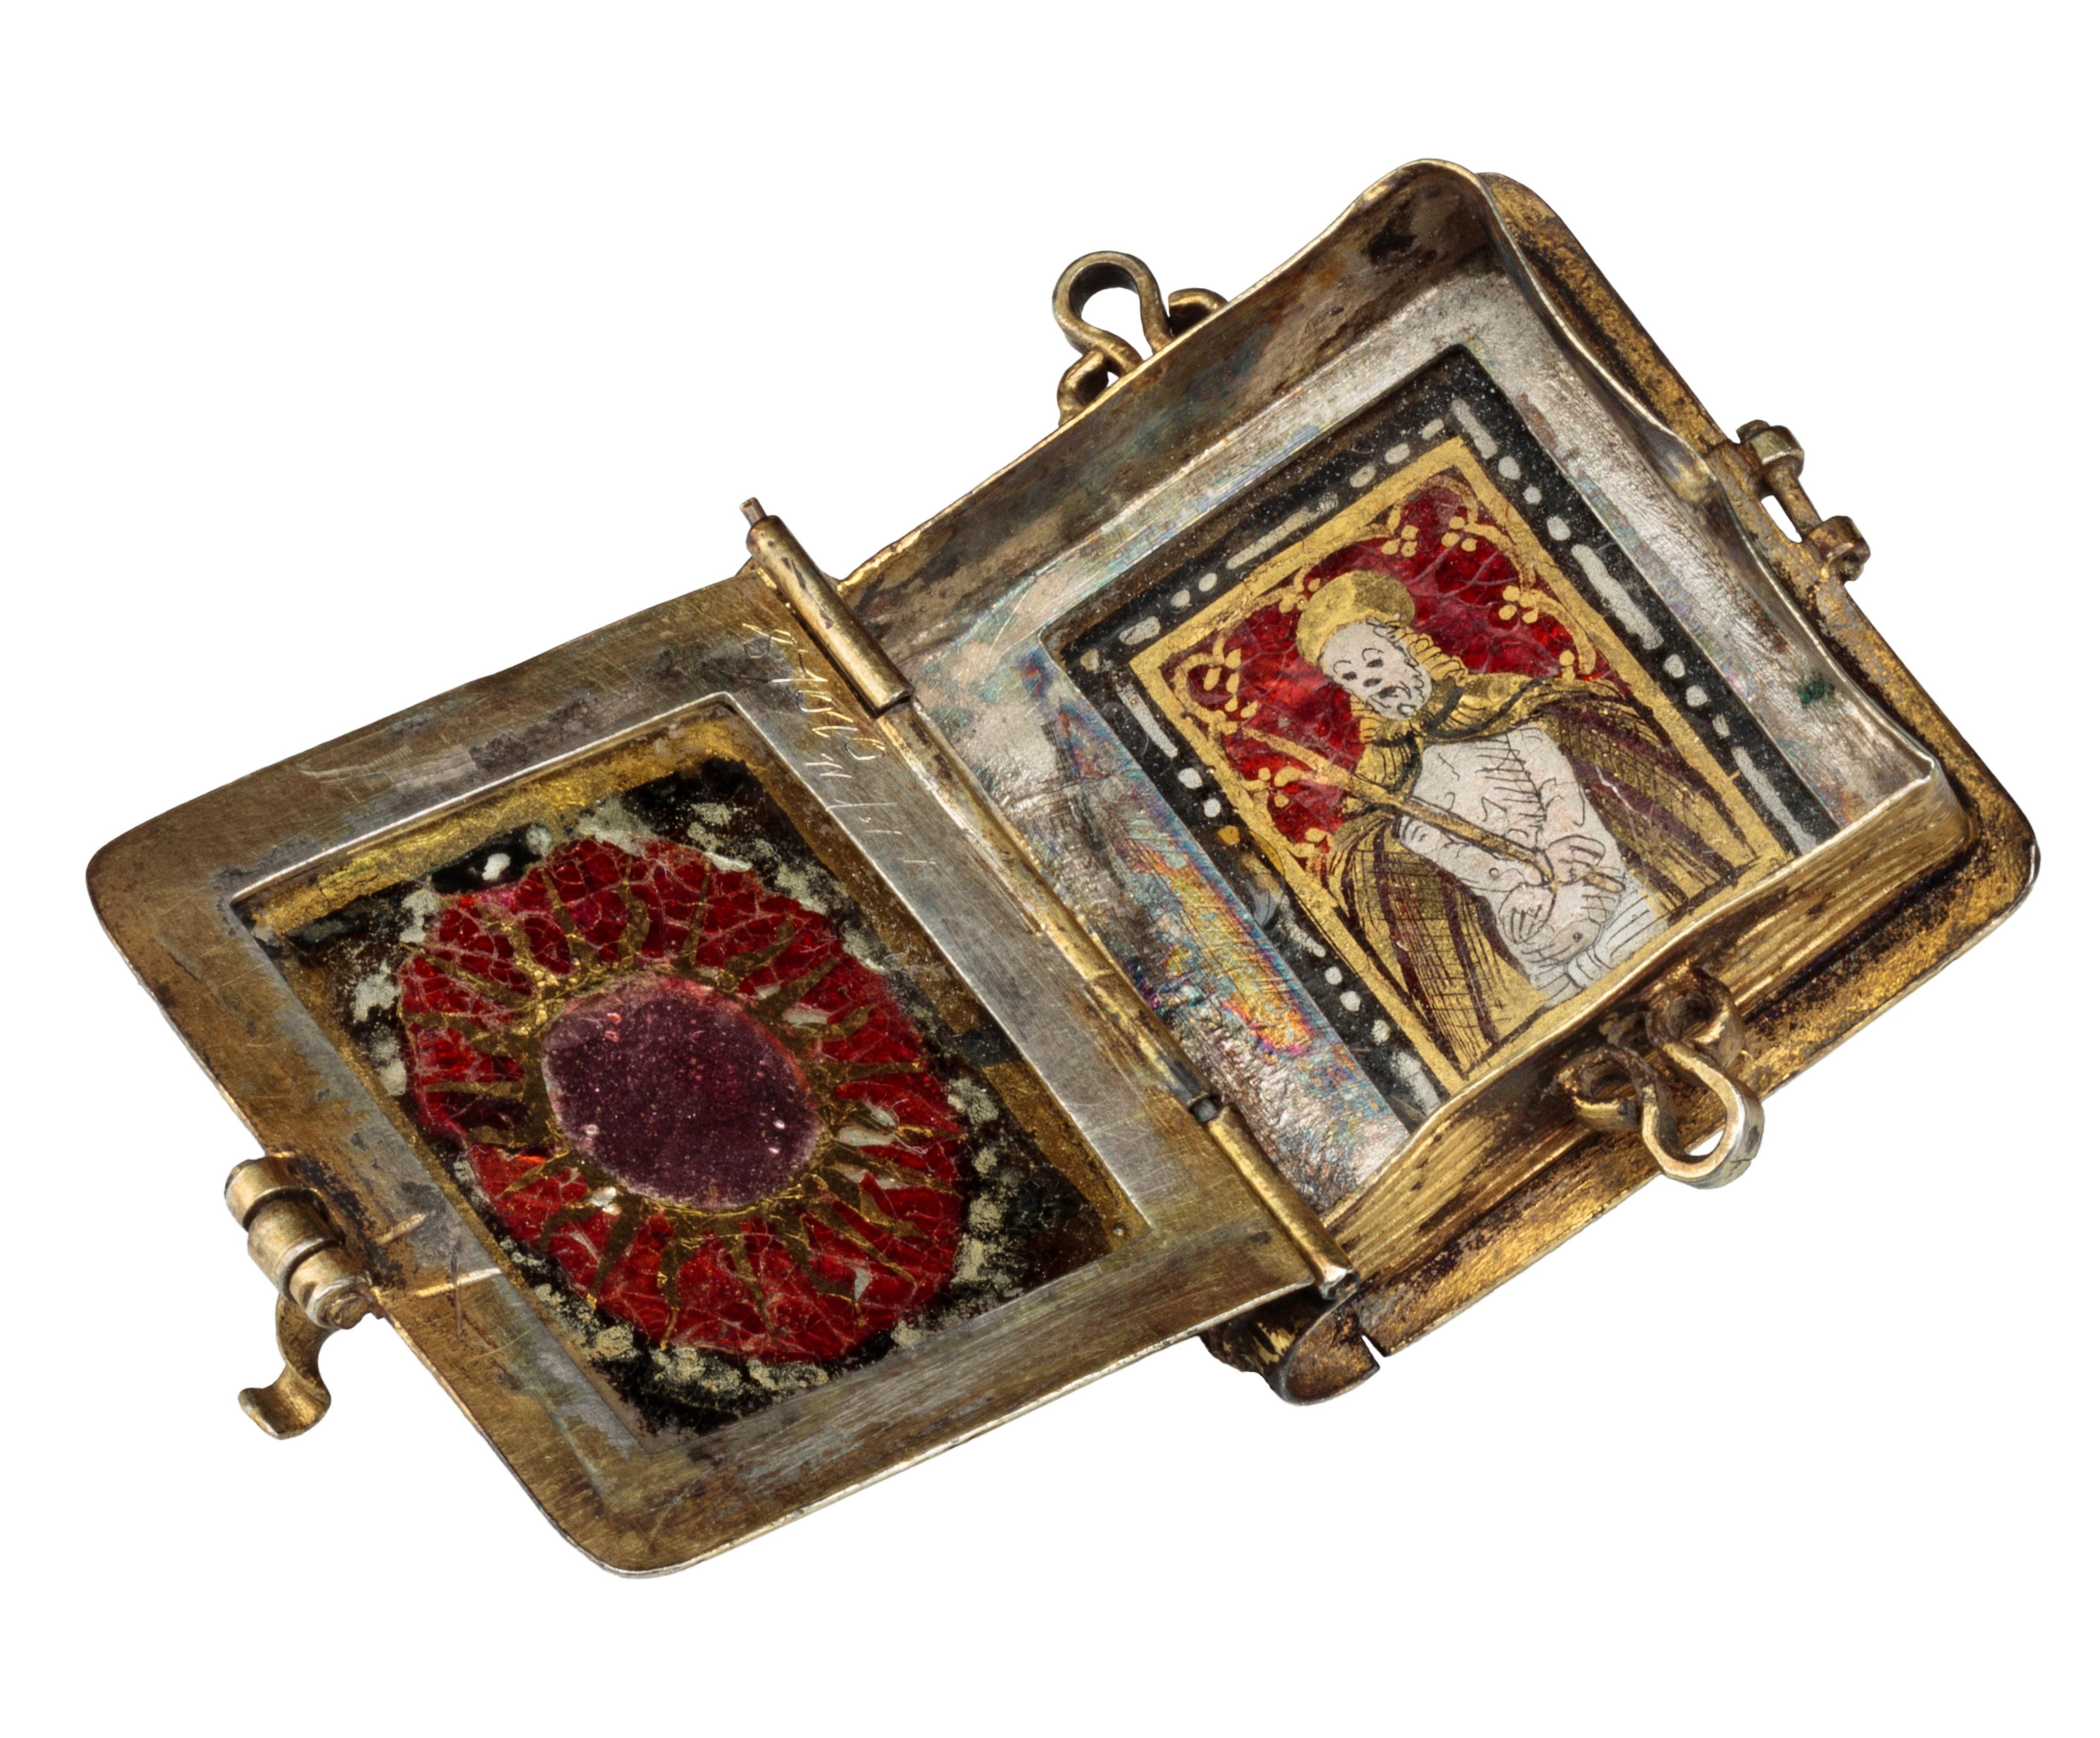 Reliquary Pendant in Book Form
Southern Germany, probably Augsburg, c. 1550 
Gilded silver, verre églomisé 
Weight 14.1 grams; dimensions 35 × 29 × 13 mm 

Gilded silver pendant in book form with hinged lid, corded wire surround, and engraved spine.